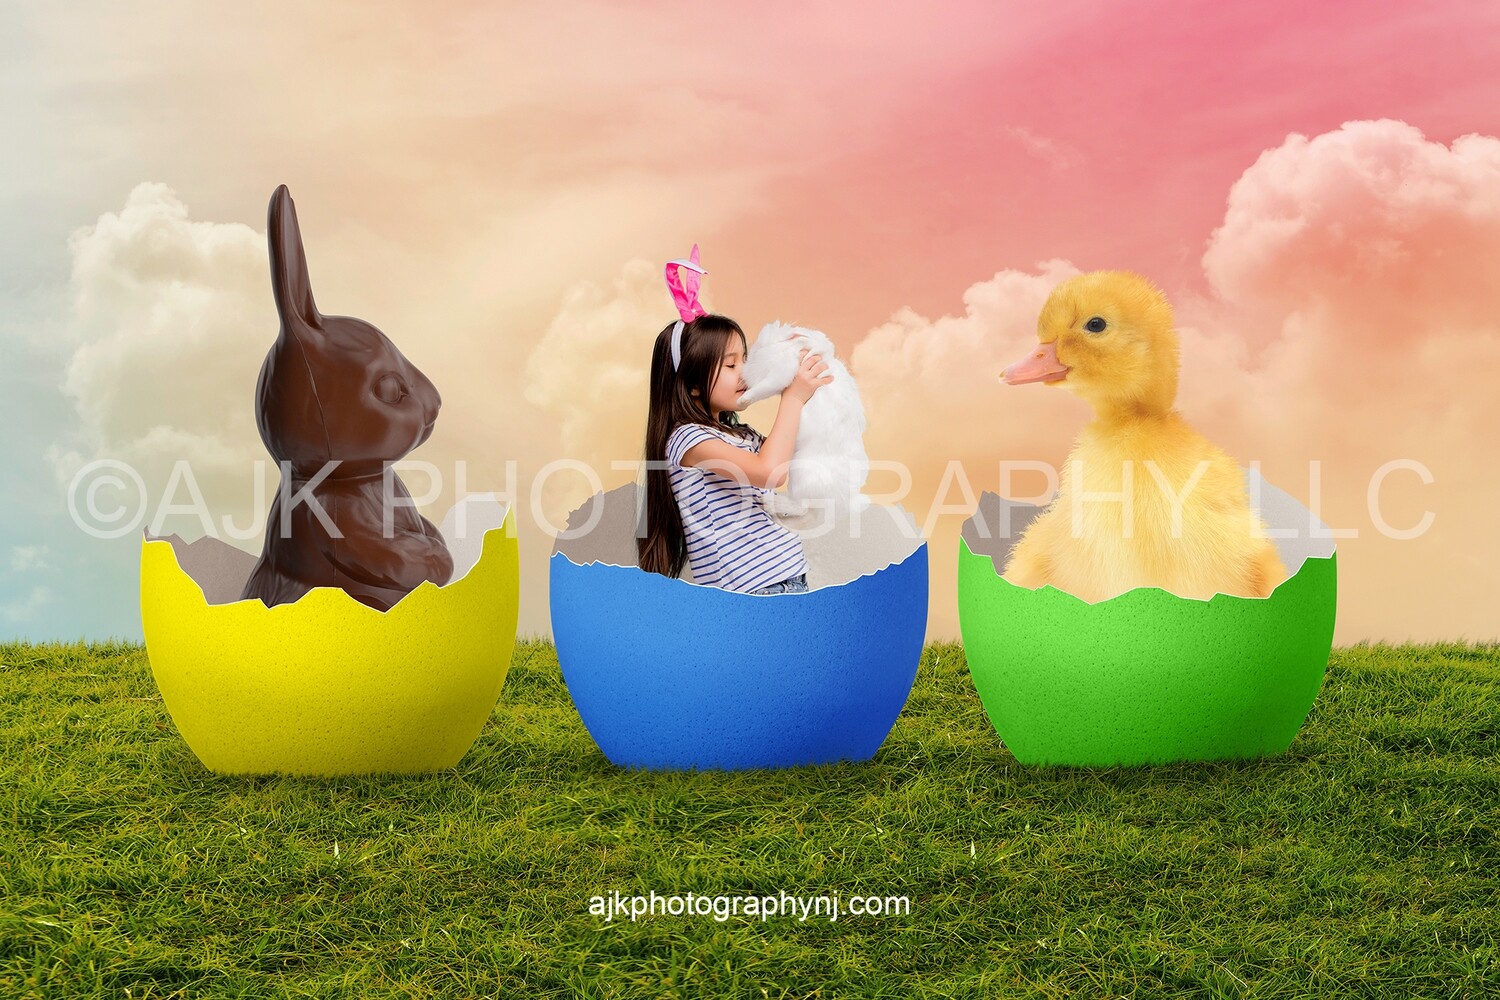 Easter digital background, chocolate bunnies and yellow chick inside cracked colored eggs, grassy field, pink sky digital backdrop